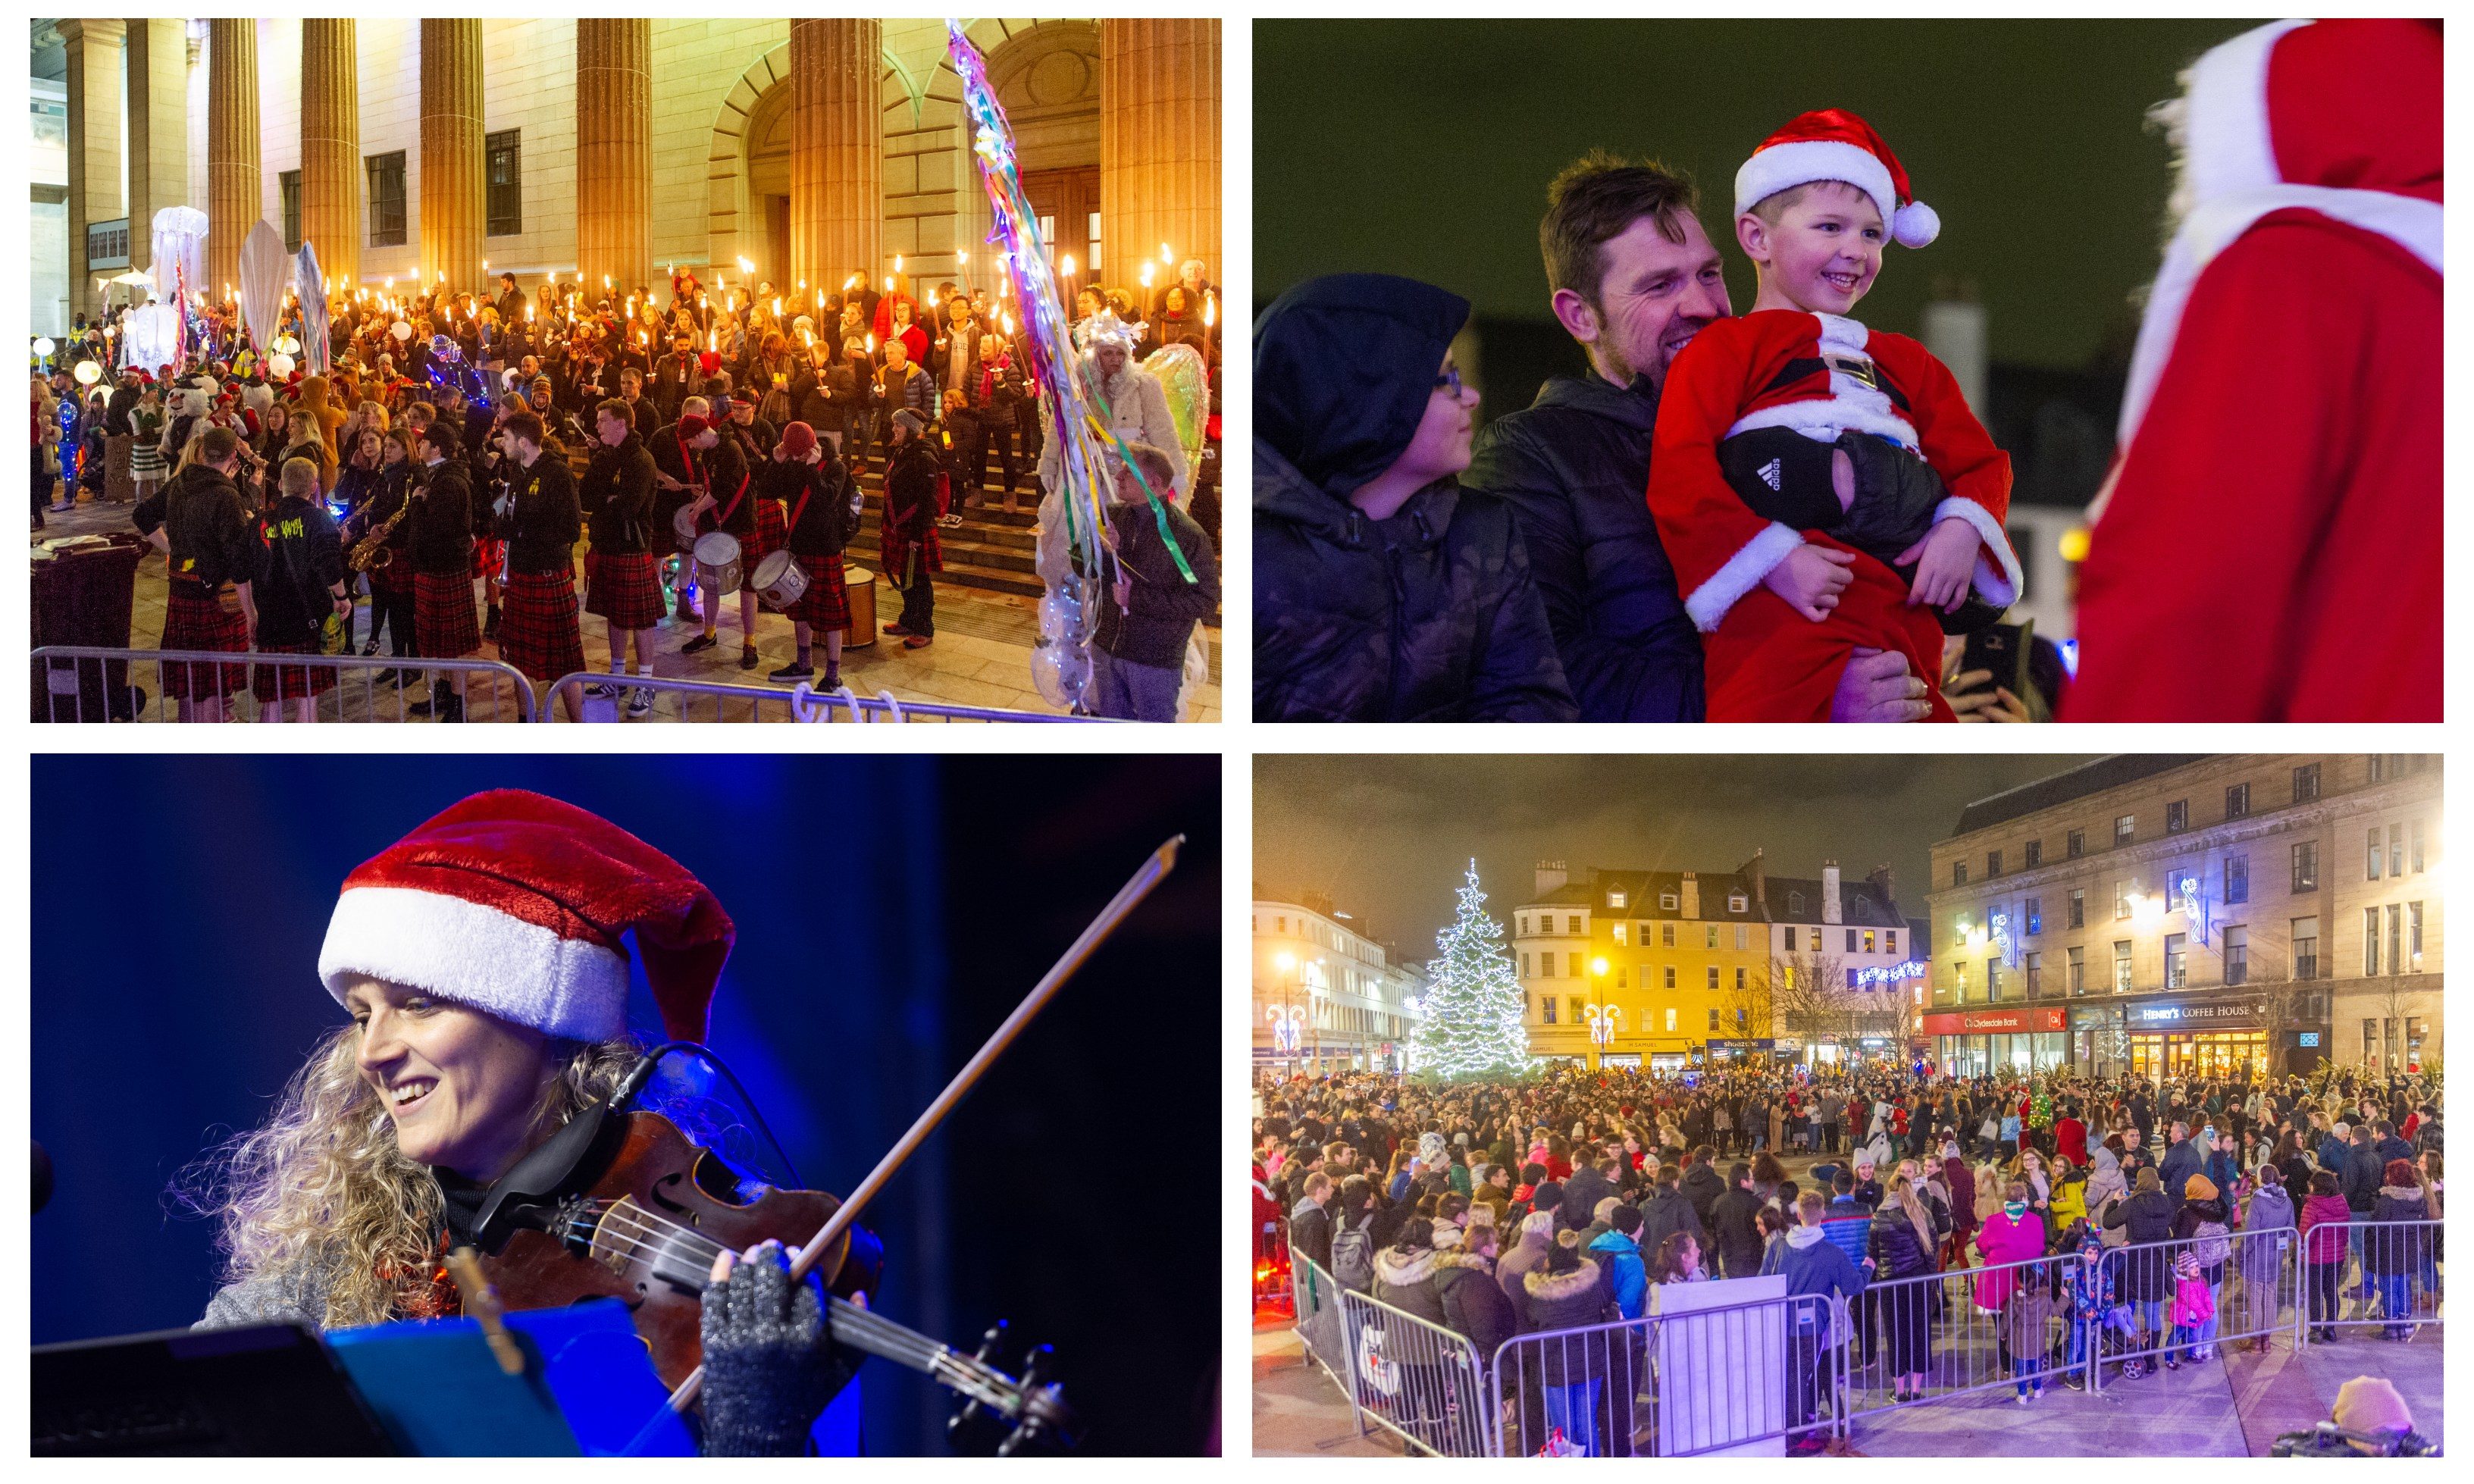 Dundee's 2018 Christmas lights switch-on event.